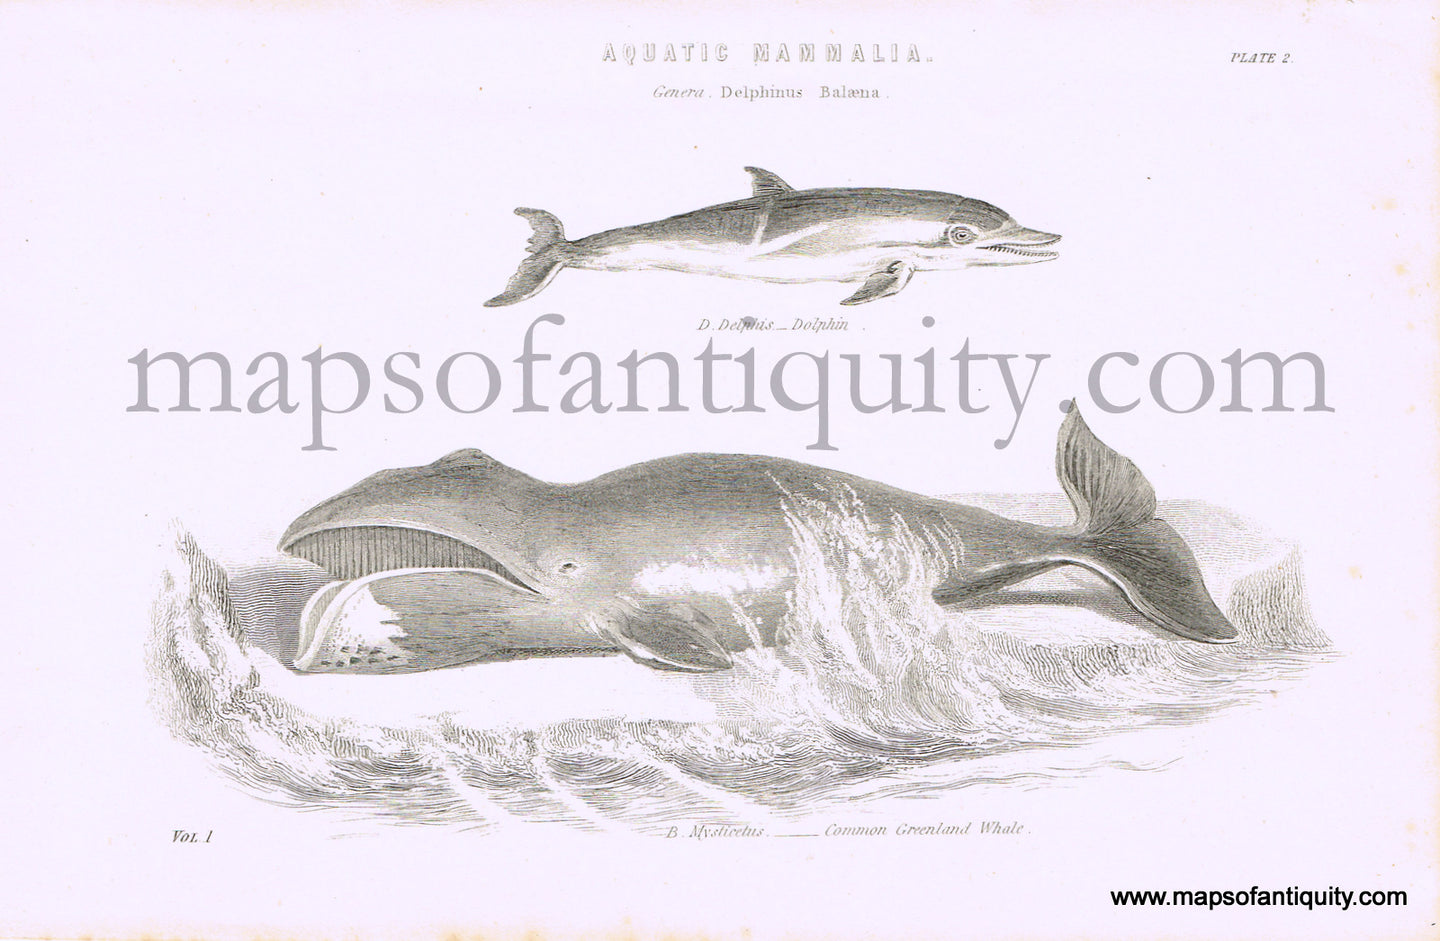 Antique-Black-and-White-Engraved-Illustration-Dolphin-and-Common-Greenland-Whale-Natural-History-Prints-Fish-Animals-1820---Maps-Of-Antiquity